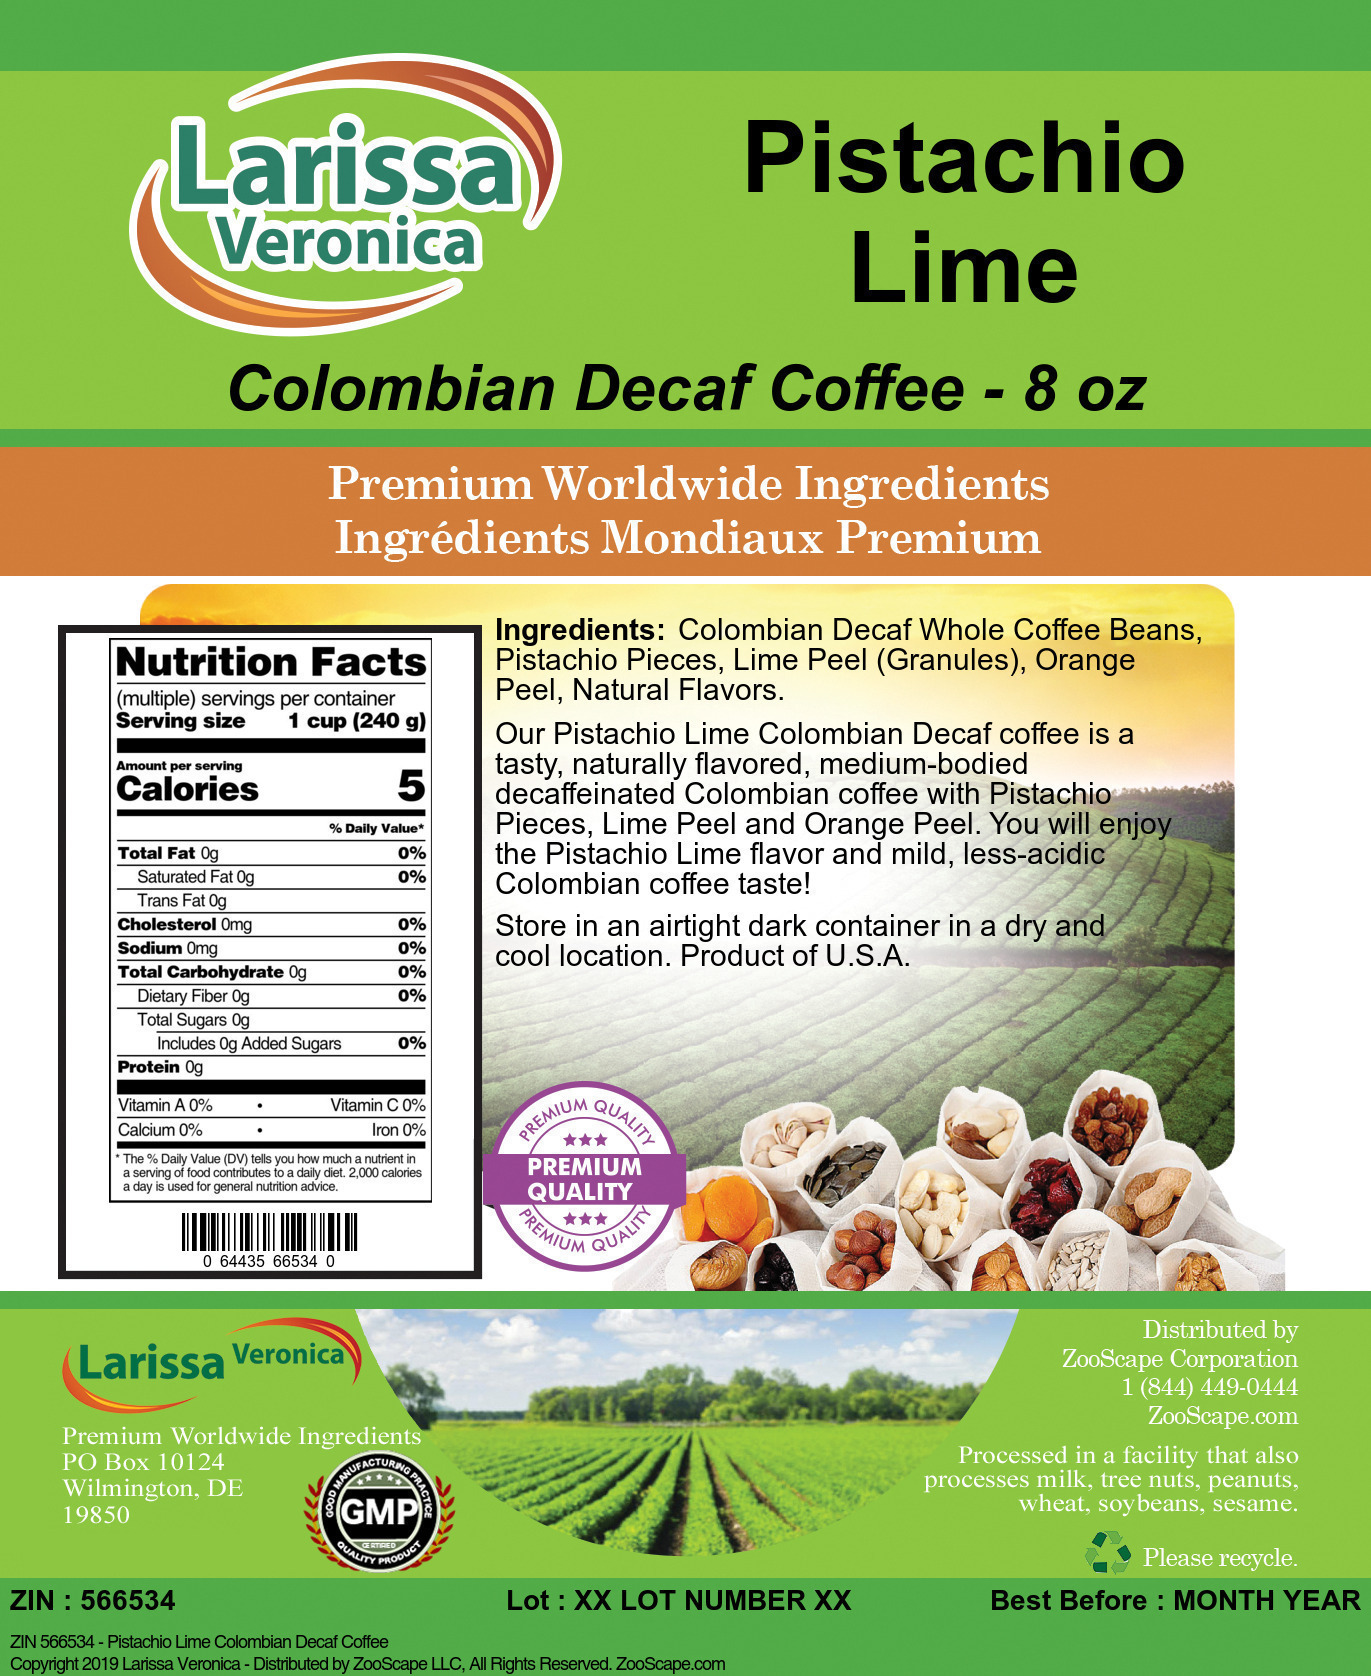 Pistachio Lime Colombian Decaf Coffee - Label